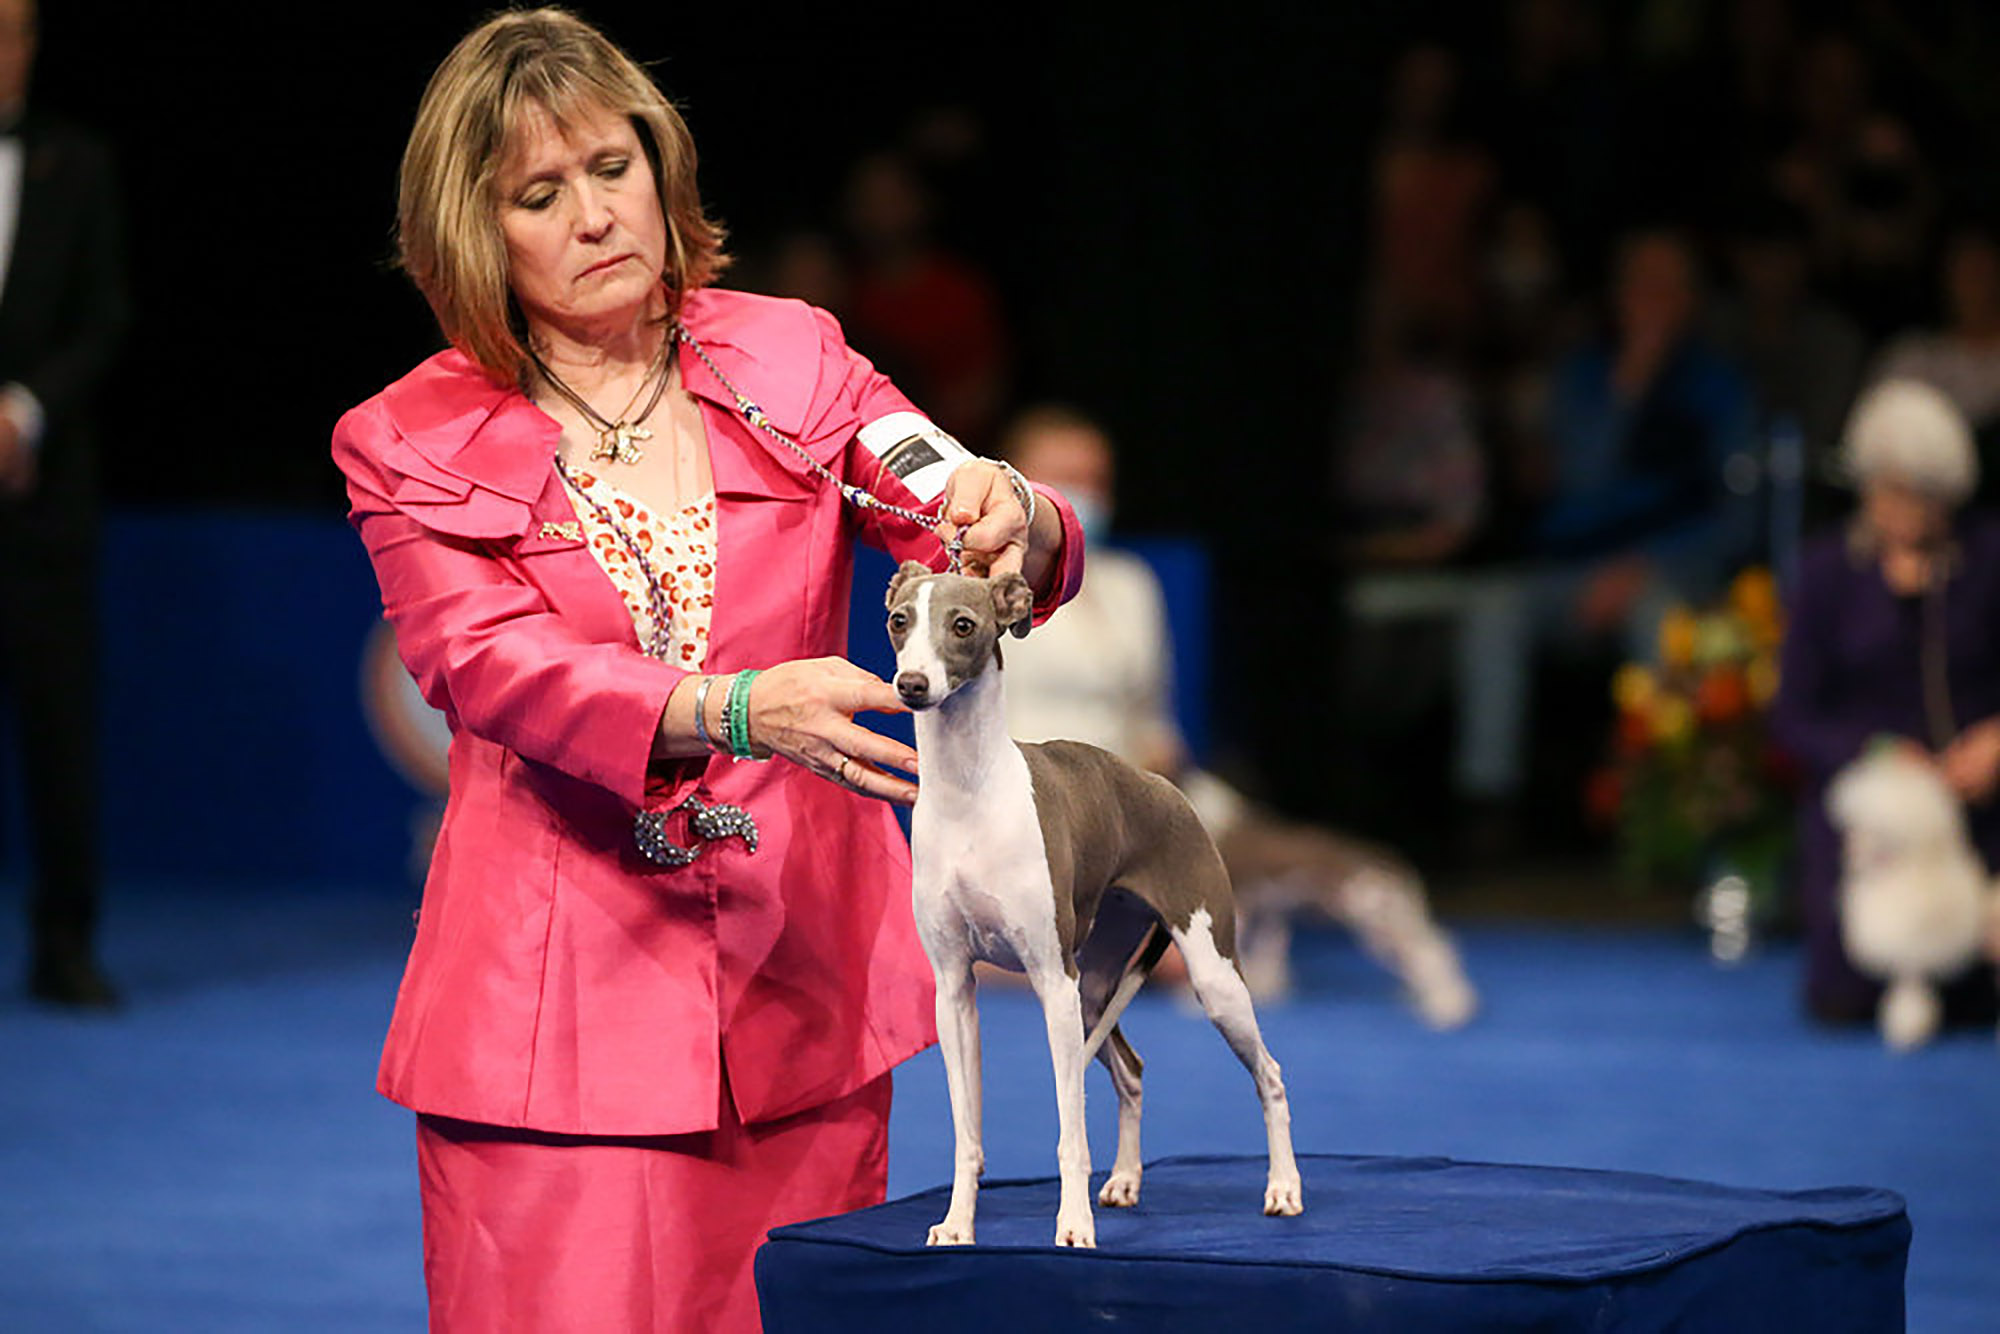 An Italian Greyhound in the judging process.